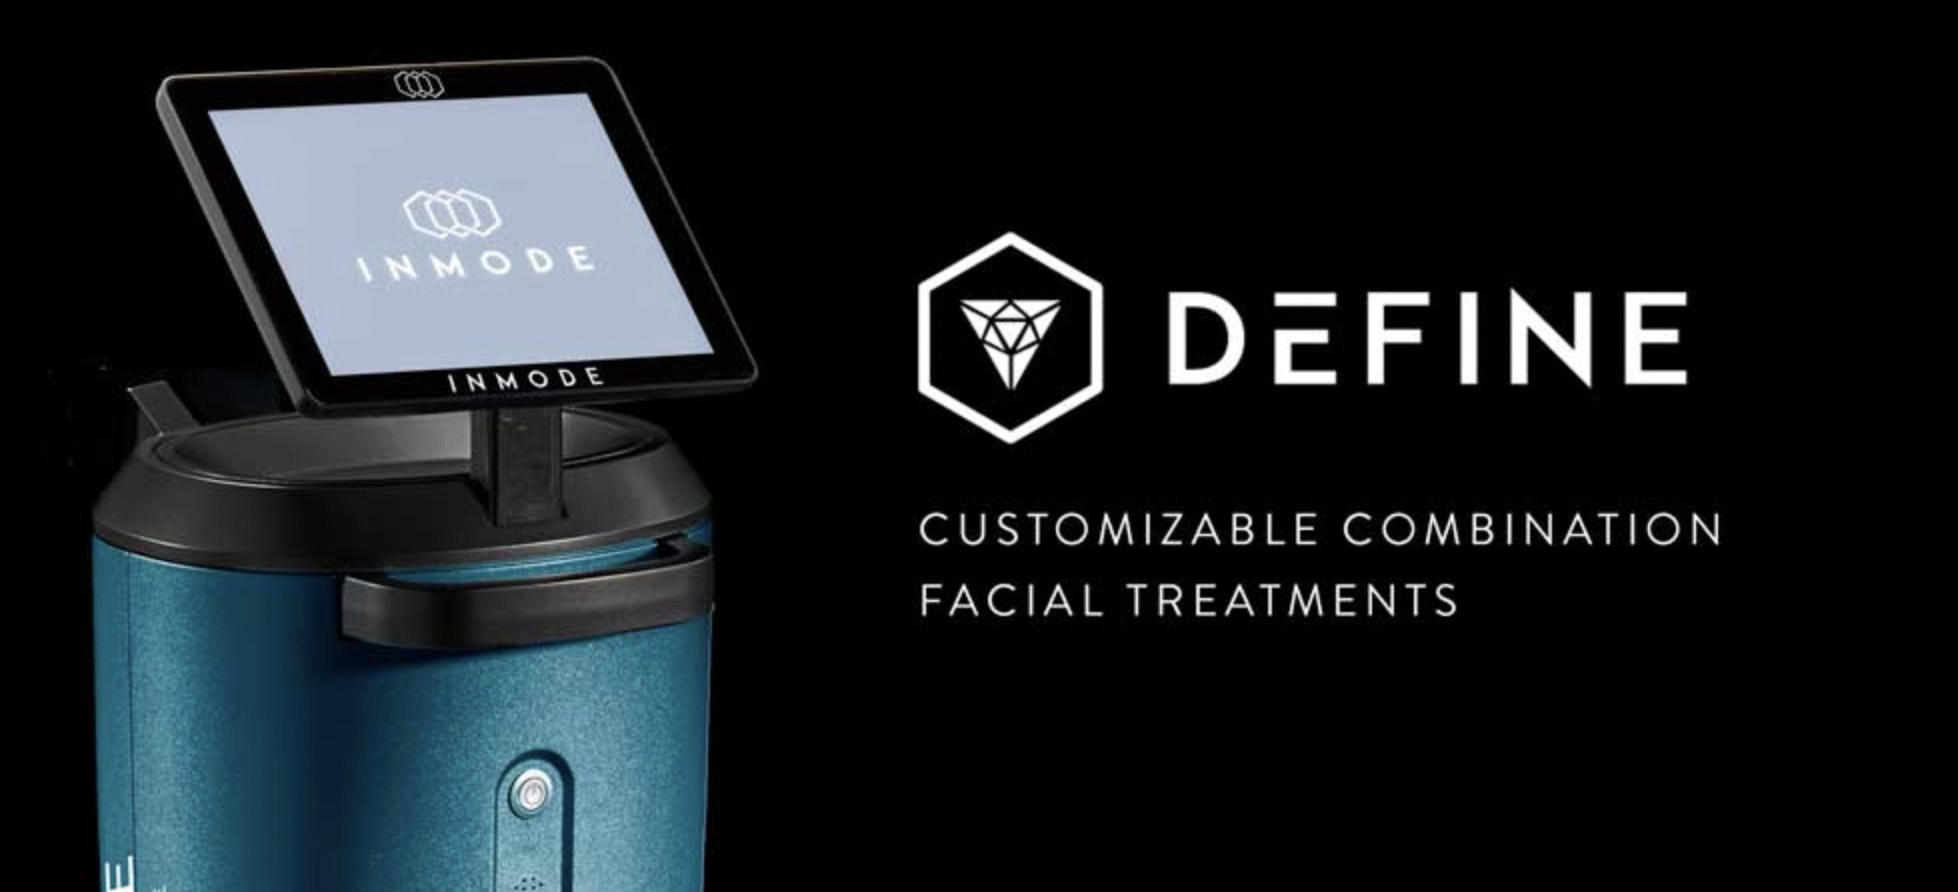 Inmode Introduces Define: The Revolutionary All-in-One Facial Remodelling Platform